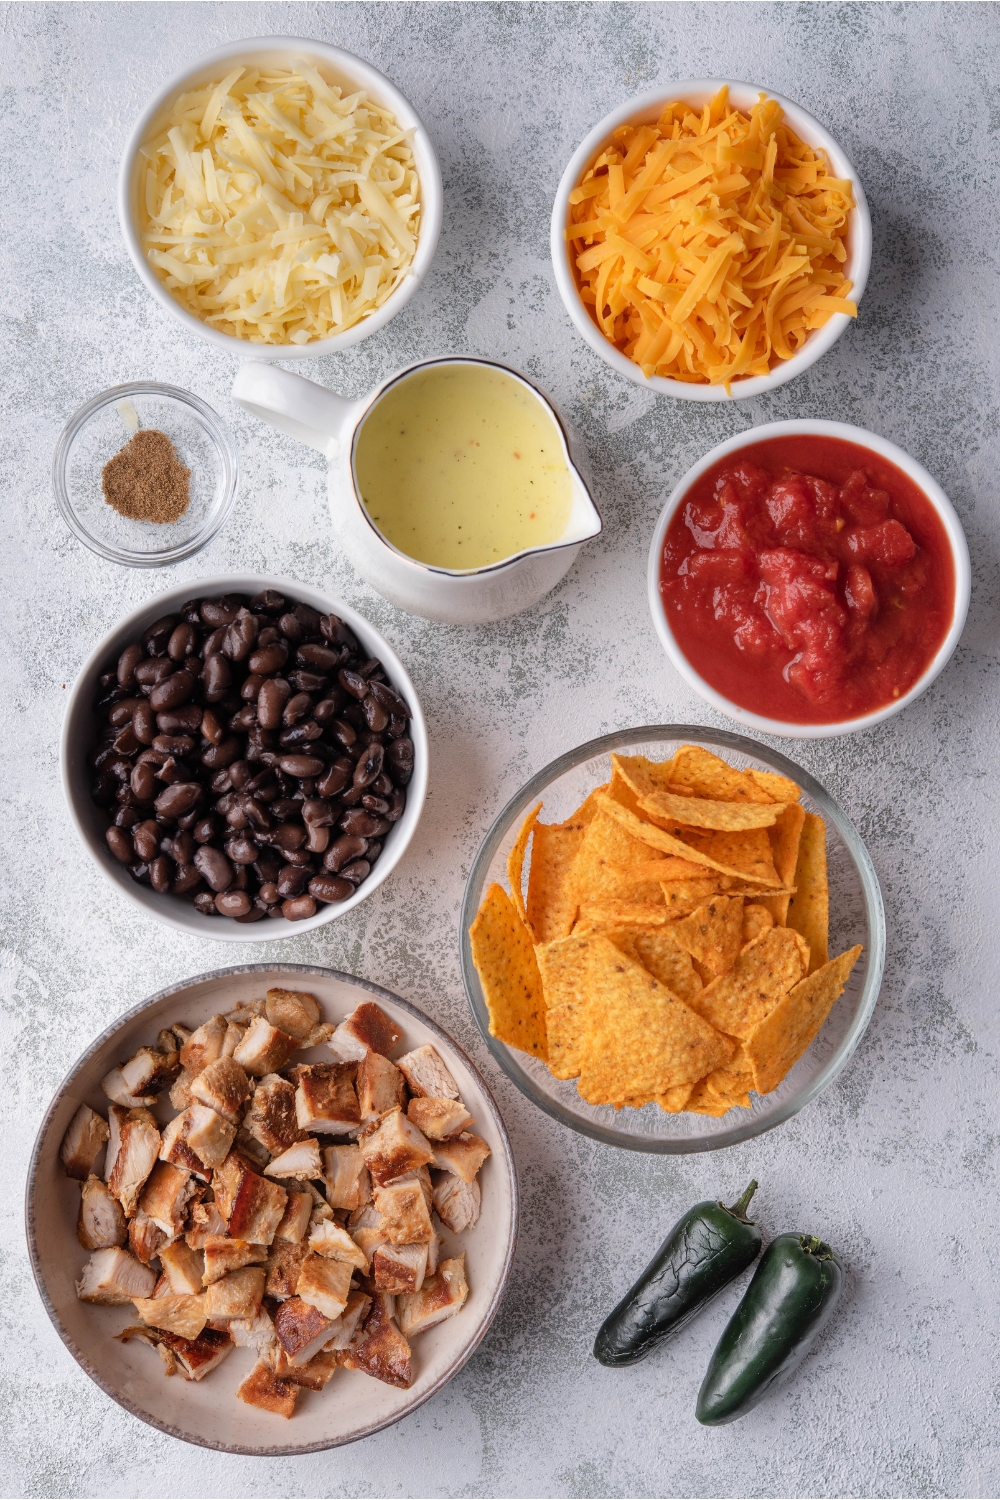 An assortment of ingredients including bowls of diced chicken, black beans, tortilla chips, crushed tomatoes, cheese, soup, and spices.